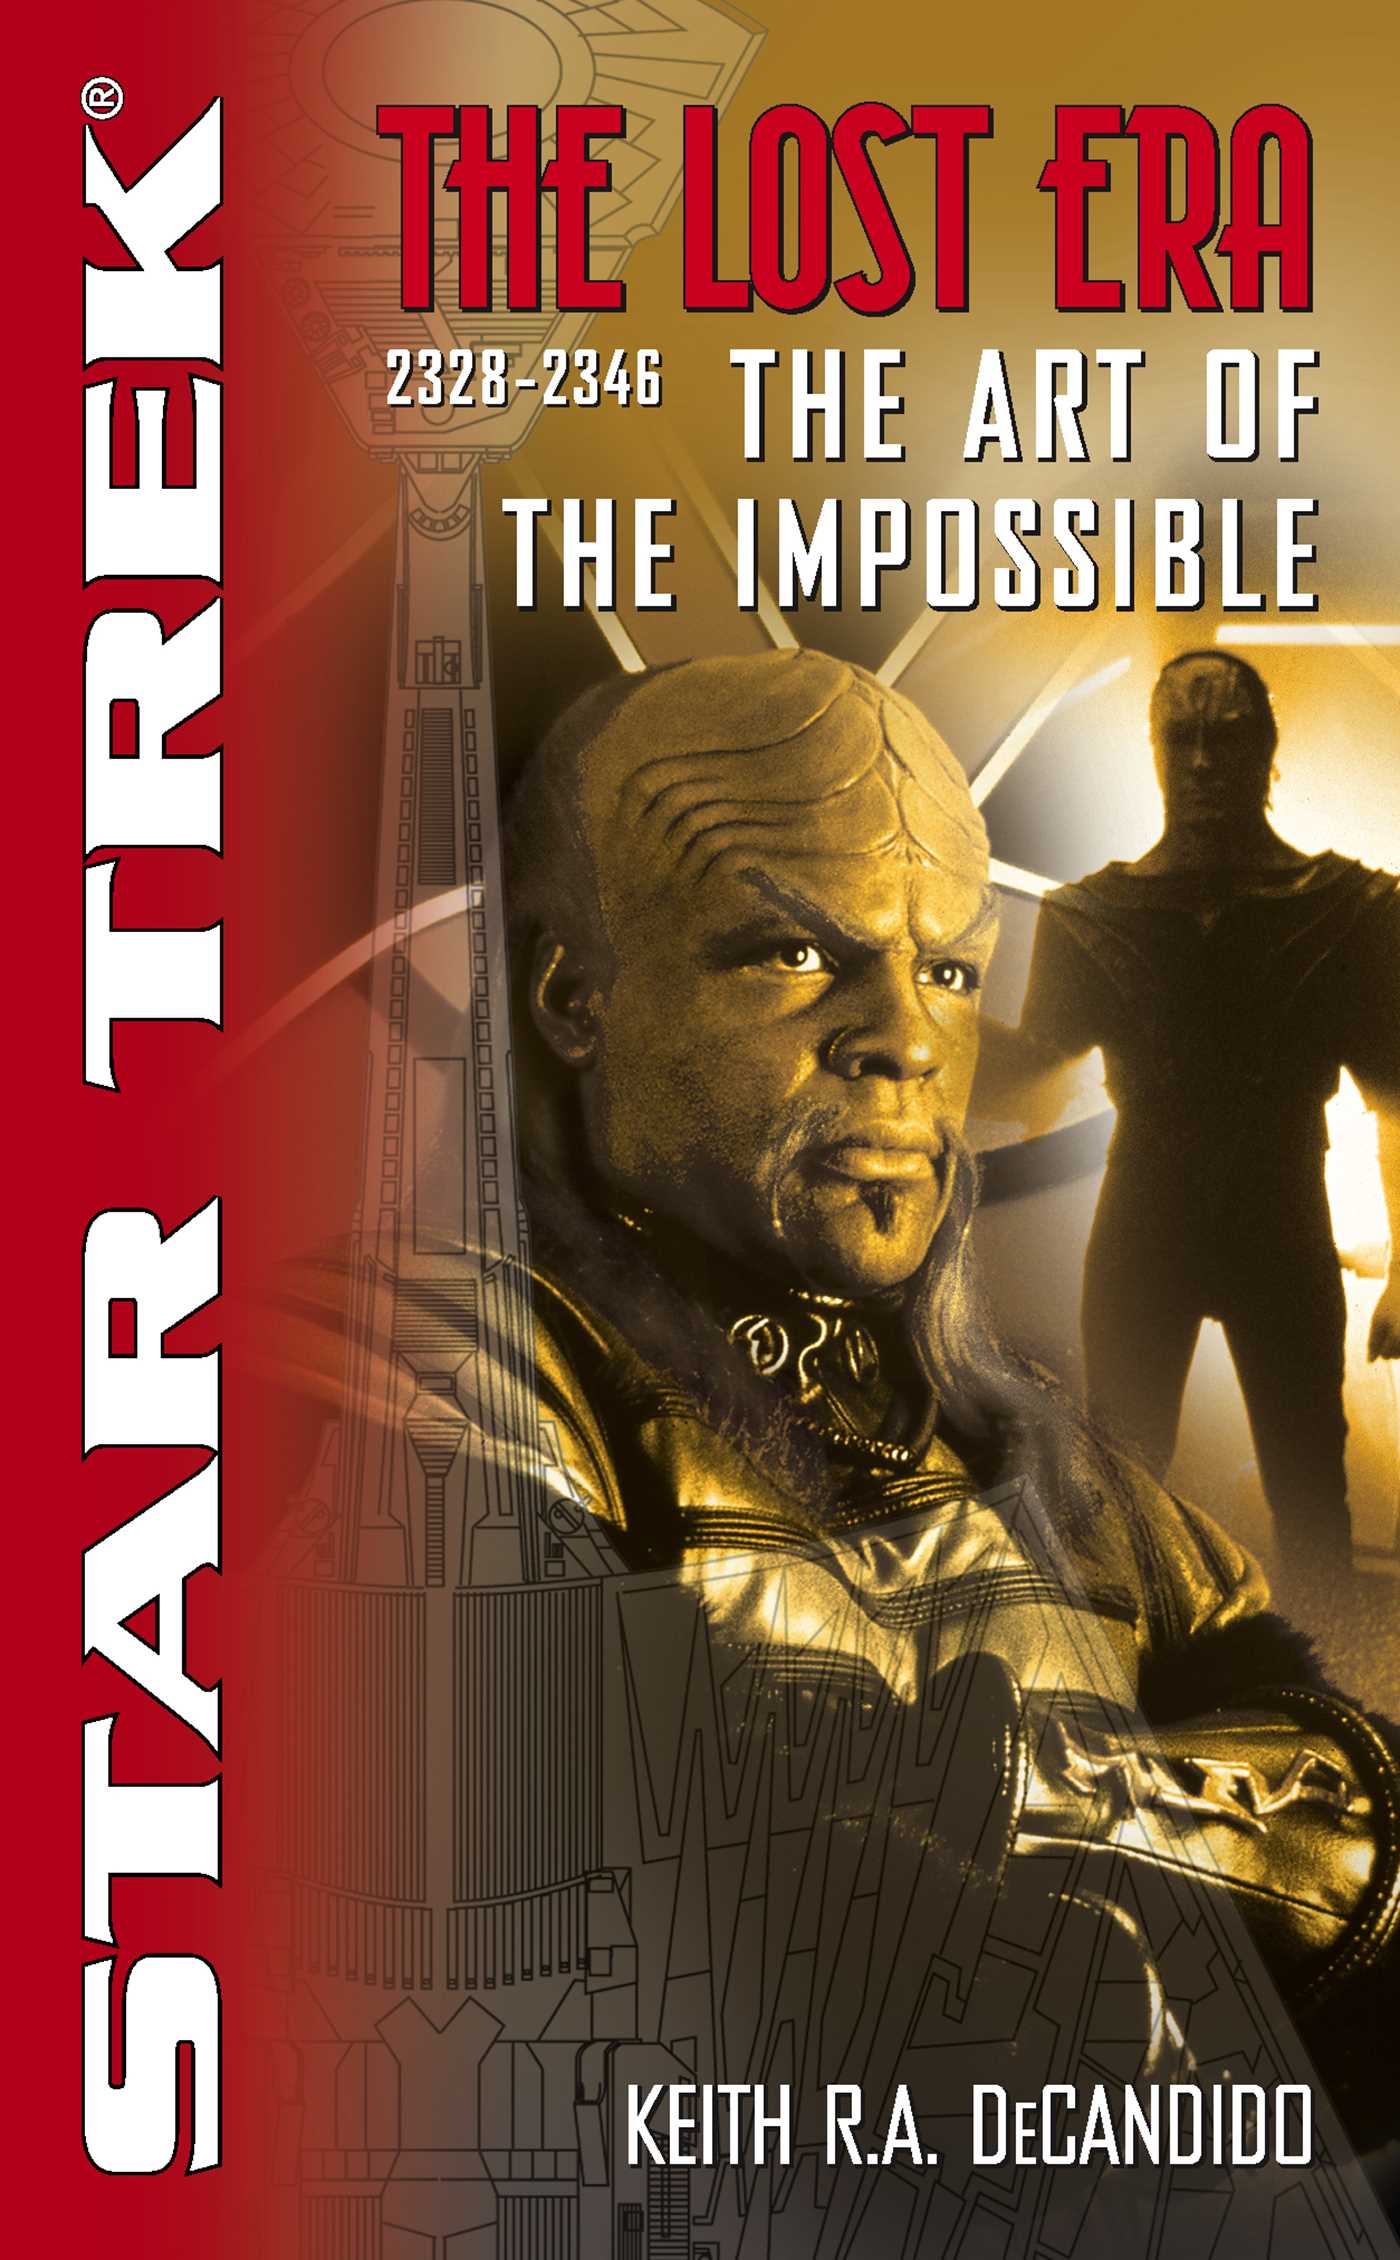 the star trek the lost era 2328 2346 the art of the impossible 9780743464062 hr 2021 Year in Review